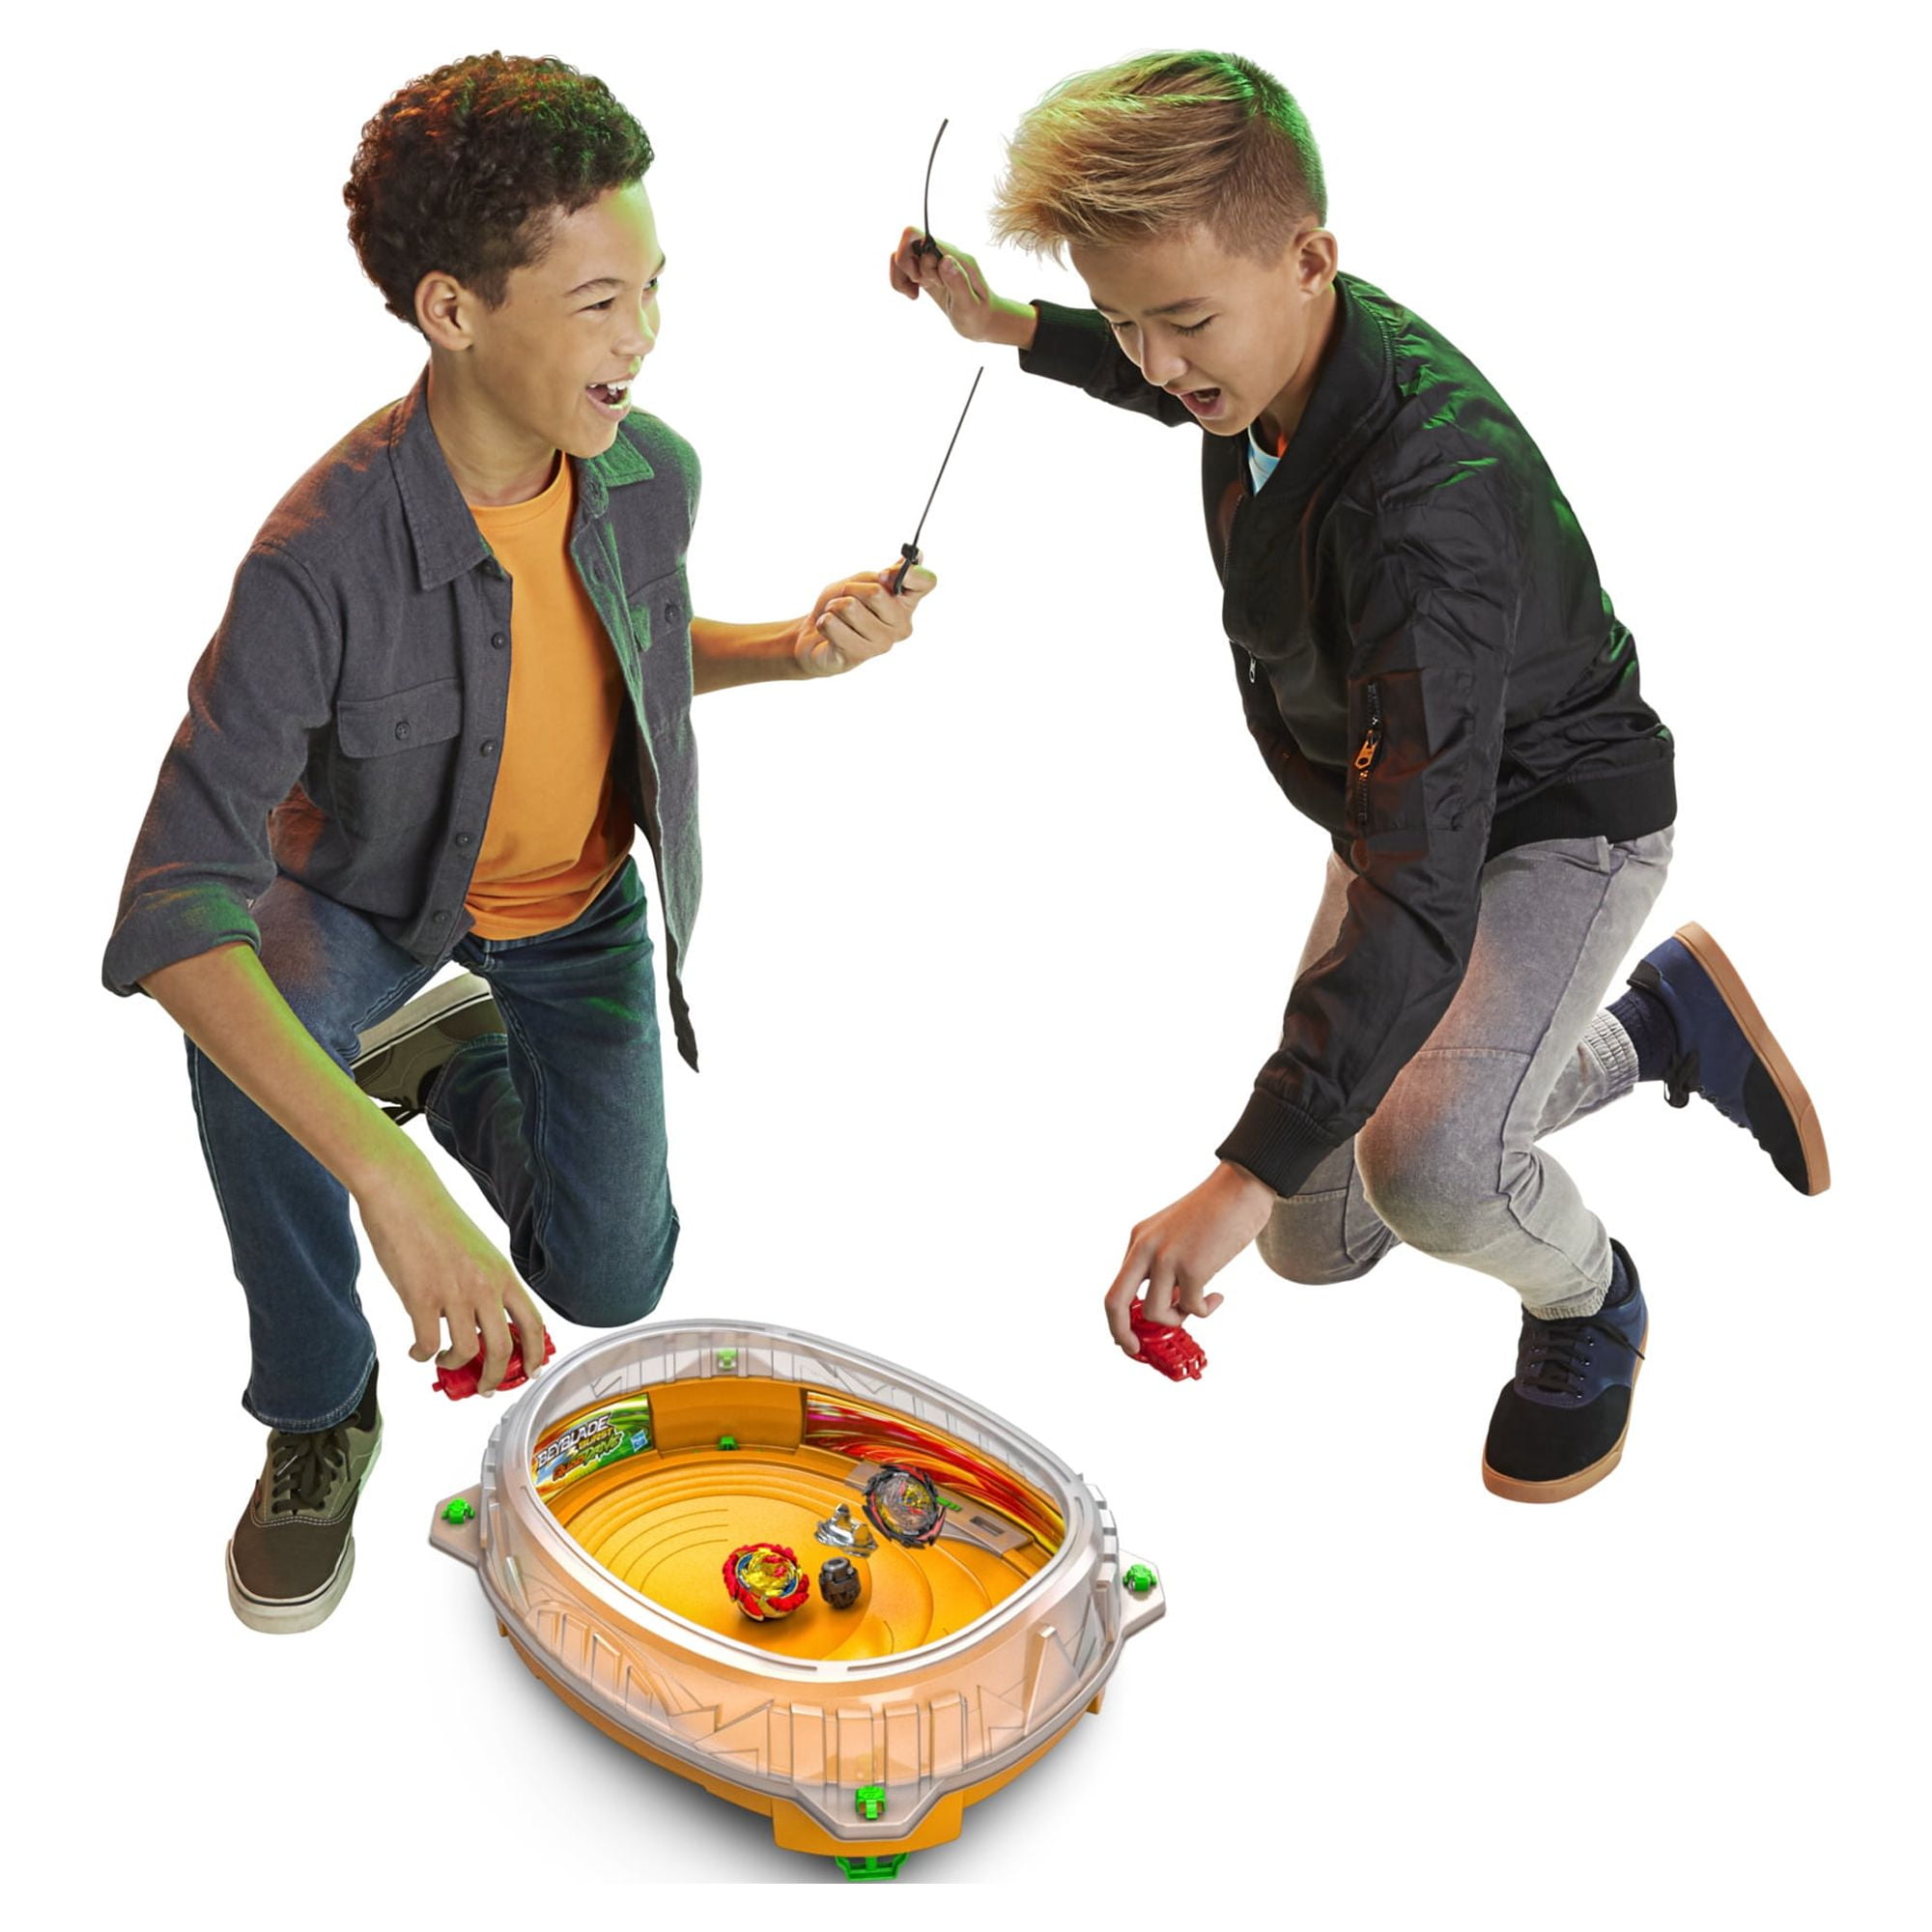 BEYBLADE Burst QuadDrive Cosmic Vector Battle Set - Battle Game Set with  Beystadium, 2 Battling Top Toys and 2 Launchers for Ages 8 and Up